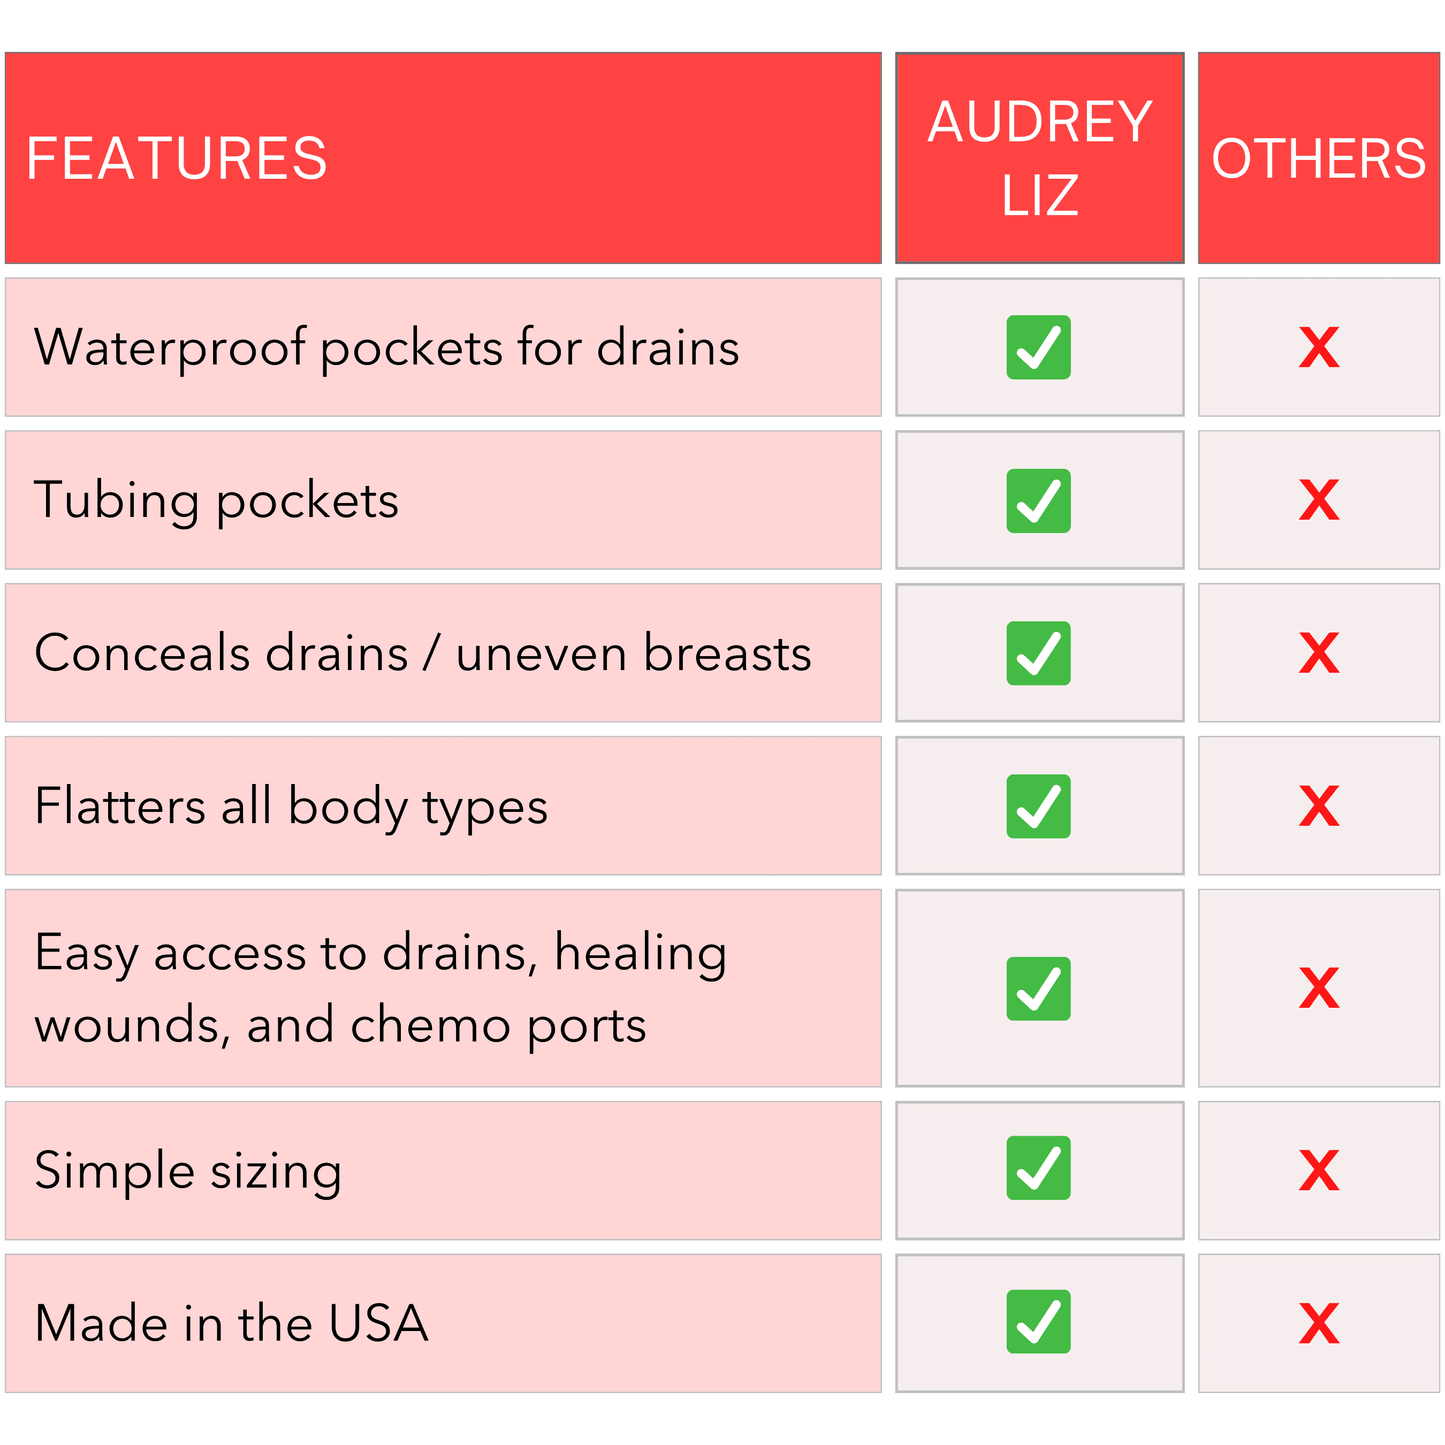 Chart showing the unique benefits Audrey Liz products have over other companies.